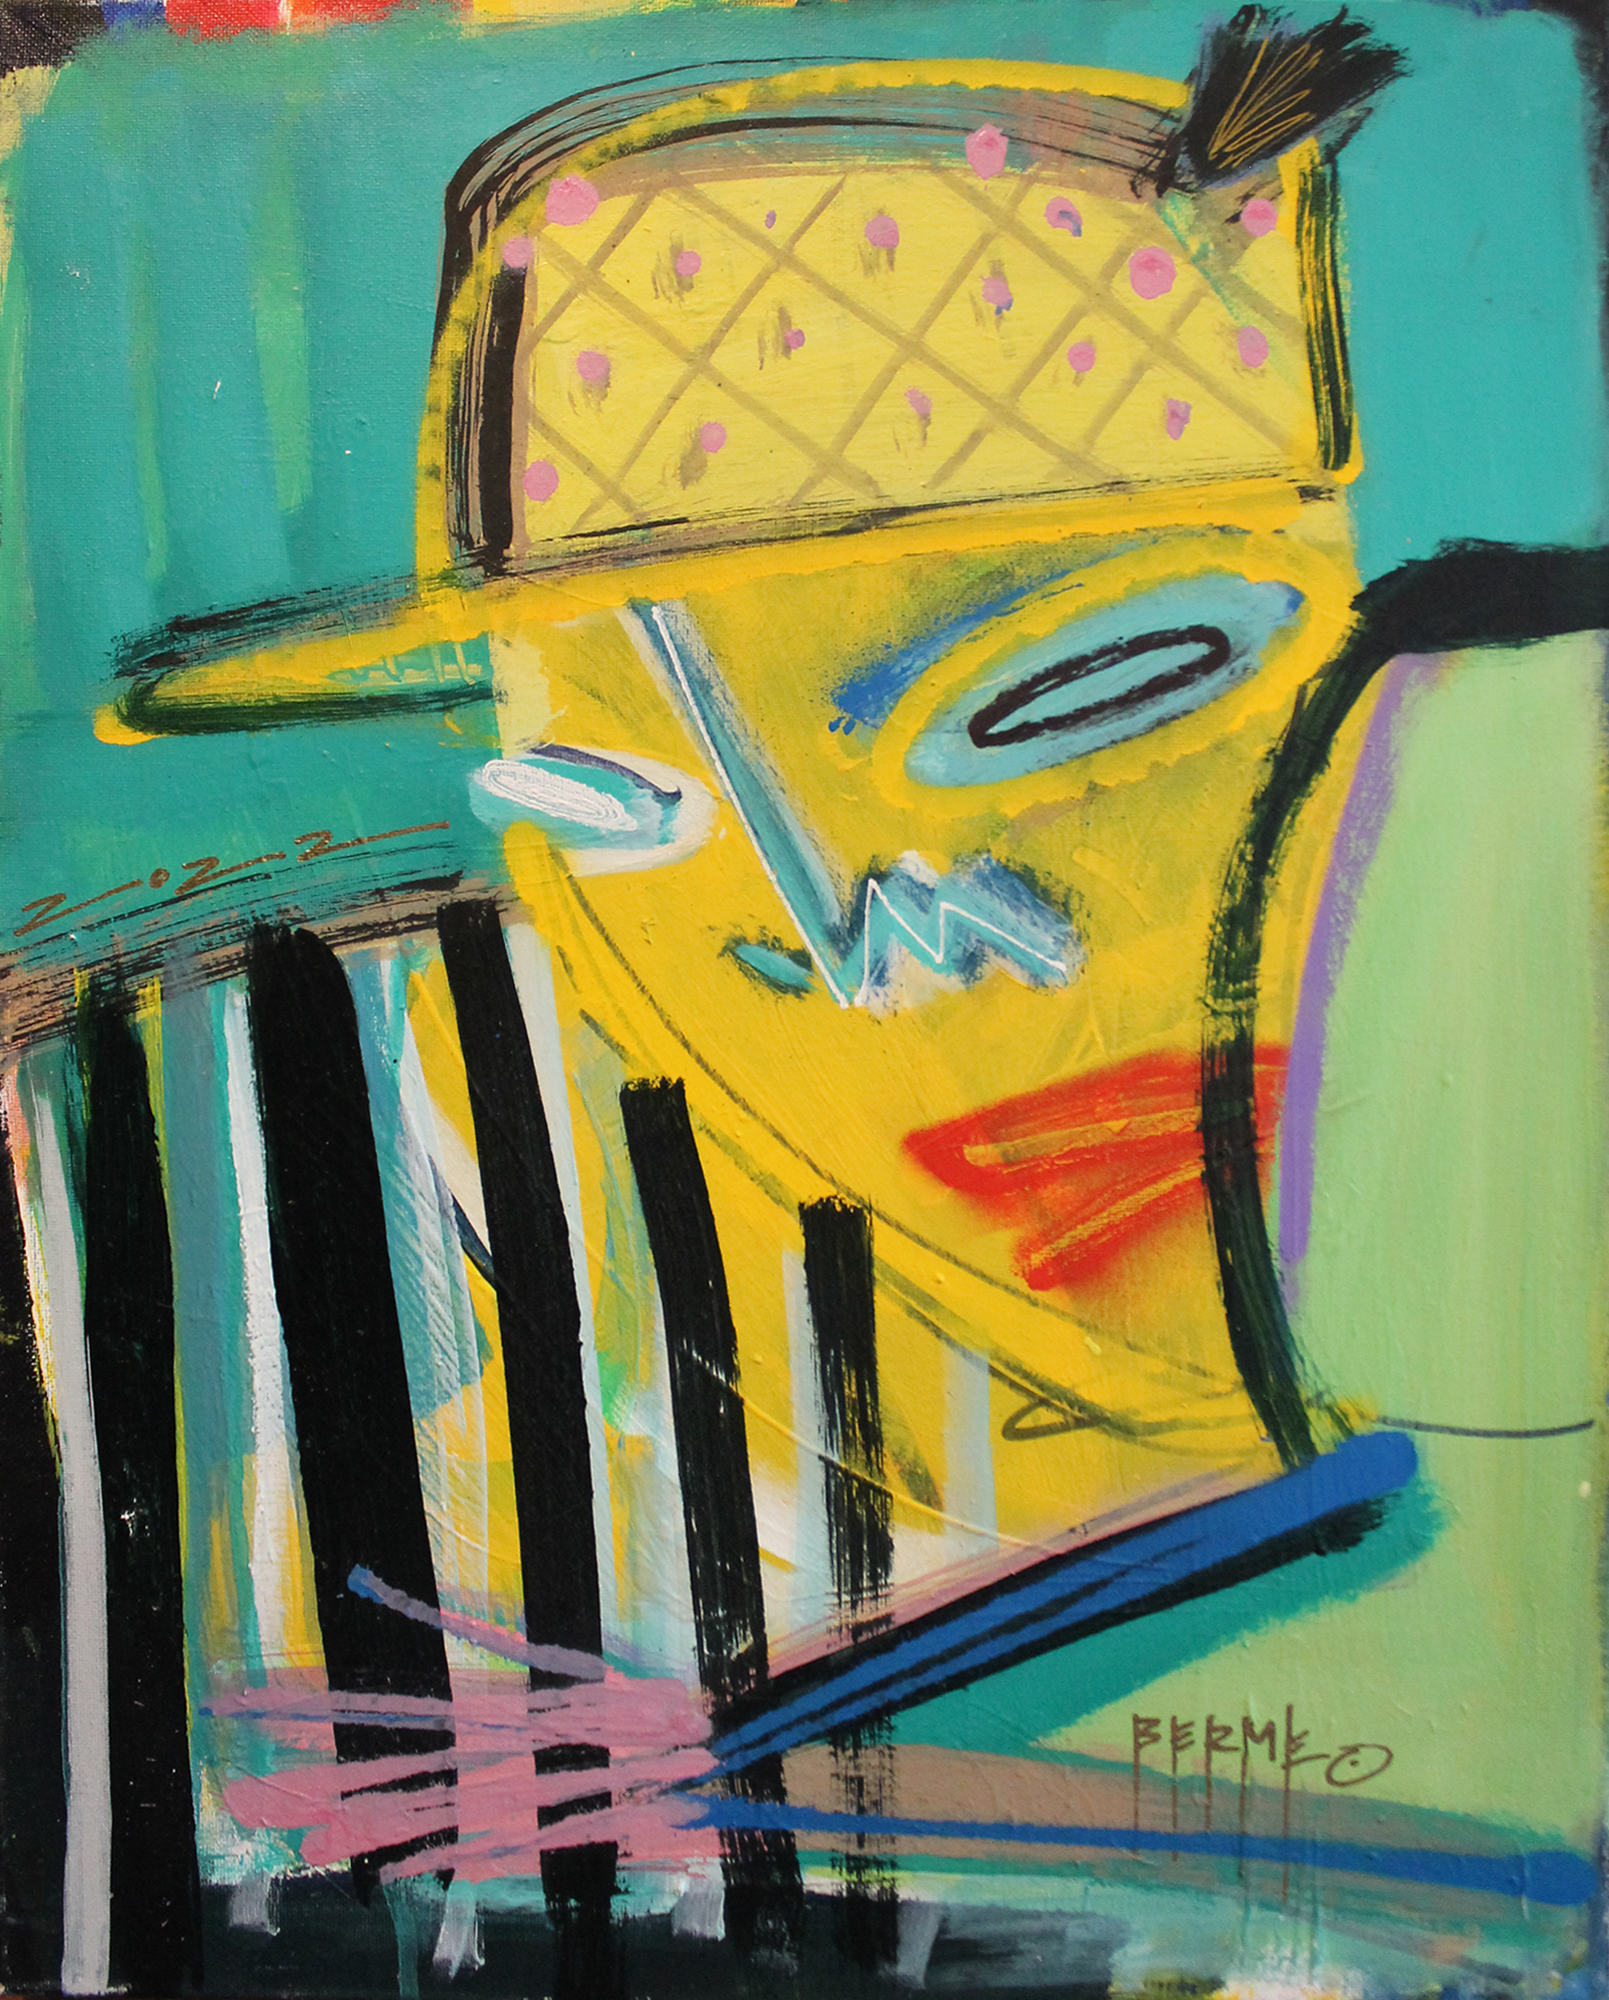   Pineapple Hat,  2022  20” x 16”   Acrylic, ink, spray paint and white-out on canvas  [ sold ]   